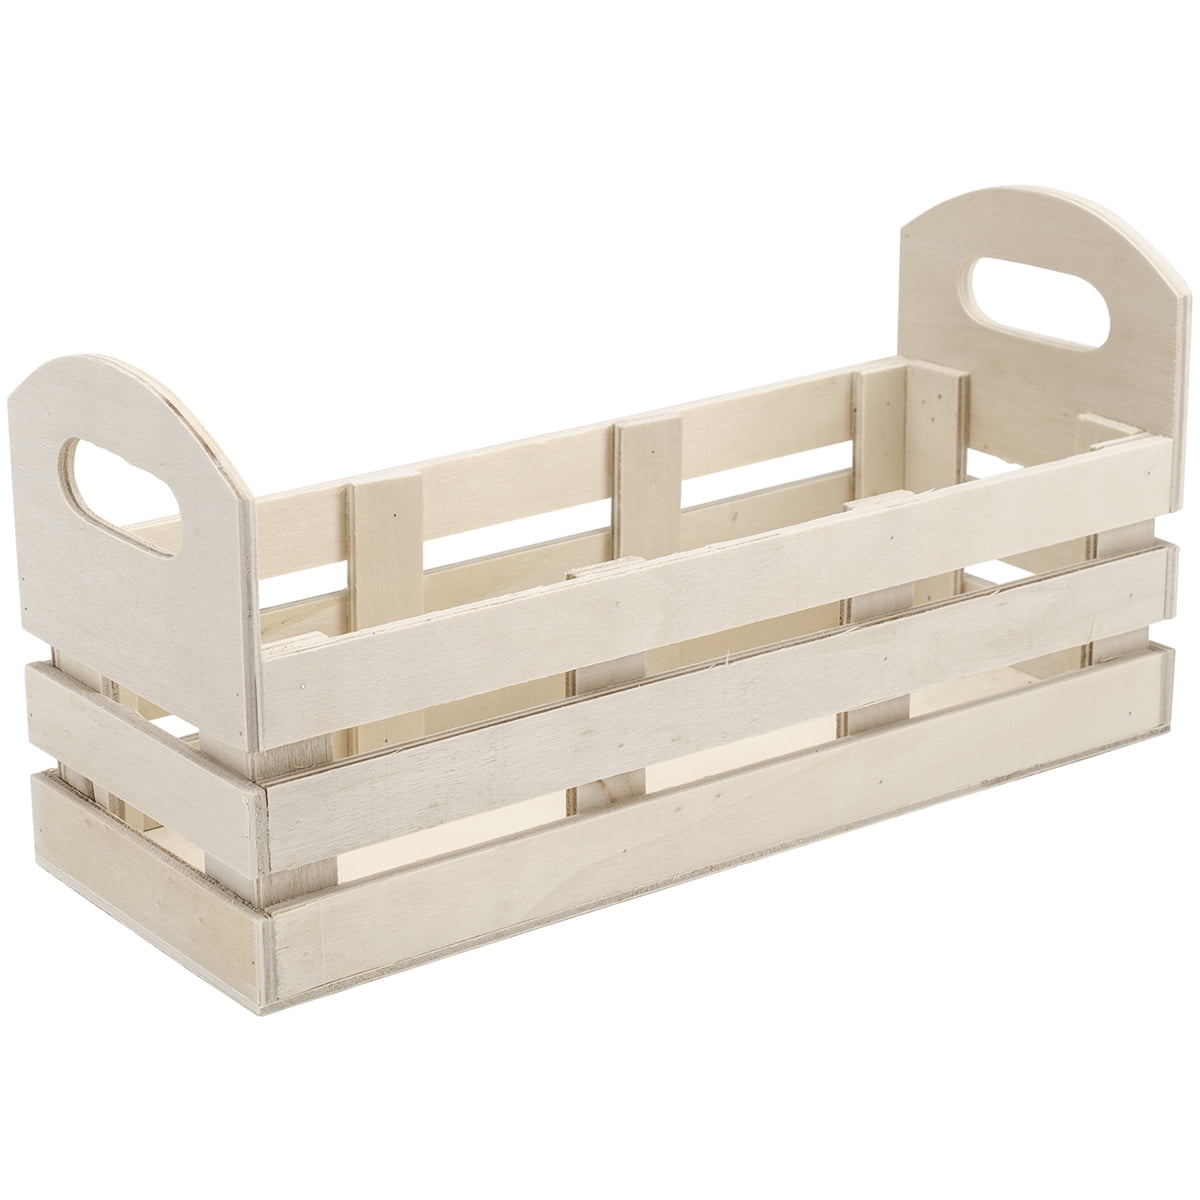 Darice Wood Country Tray Basket 12.5 